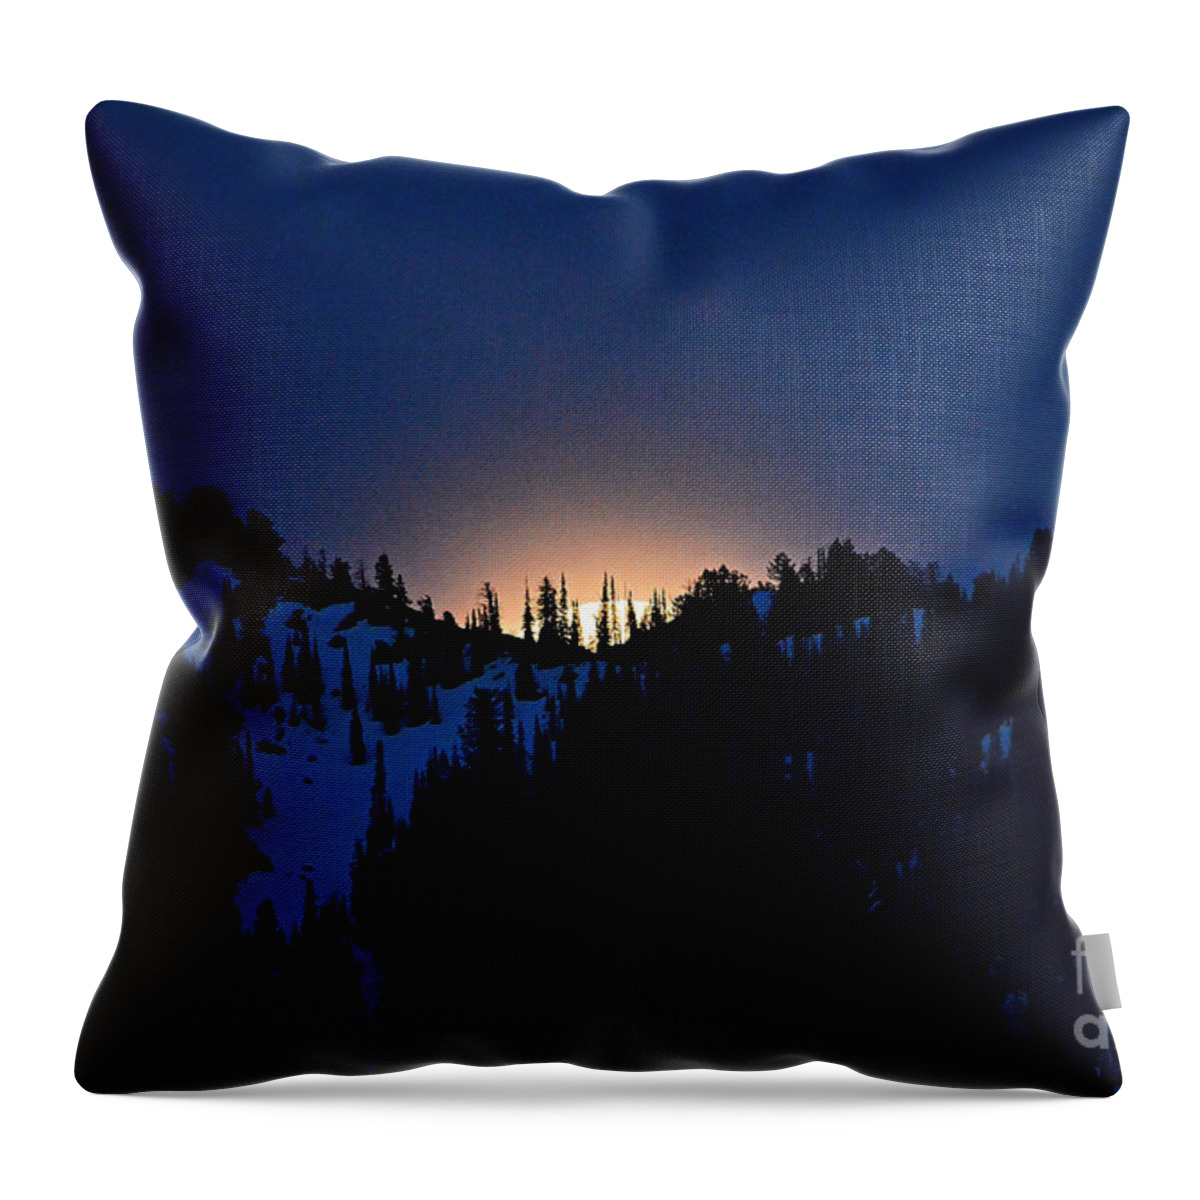 Full Moon Throw Pillow featuring the photograph Full Flower Moon #2 by Dorrene BrownButterfield